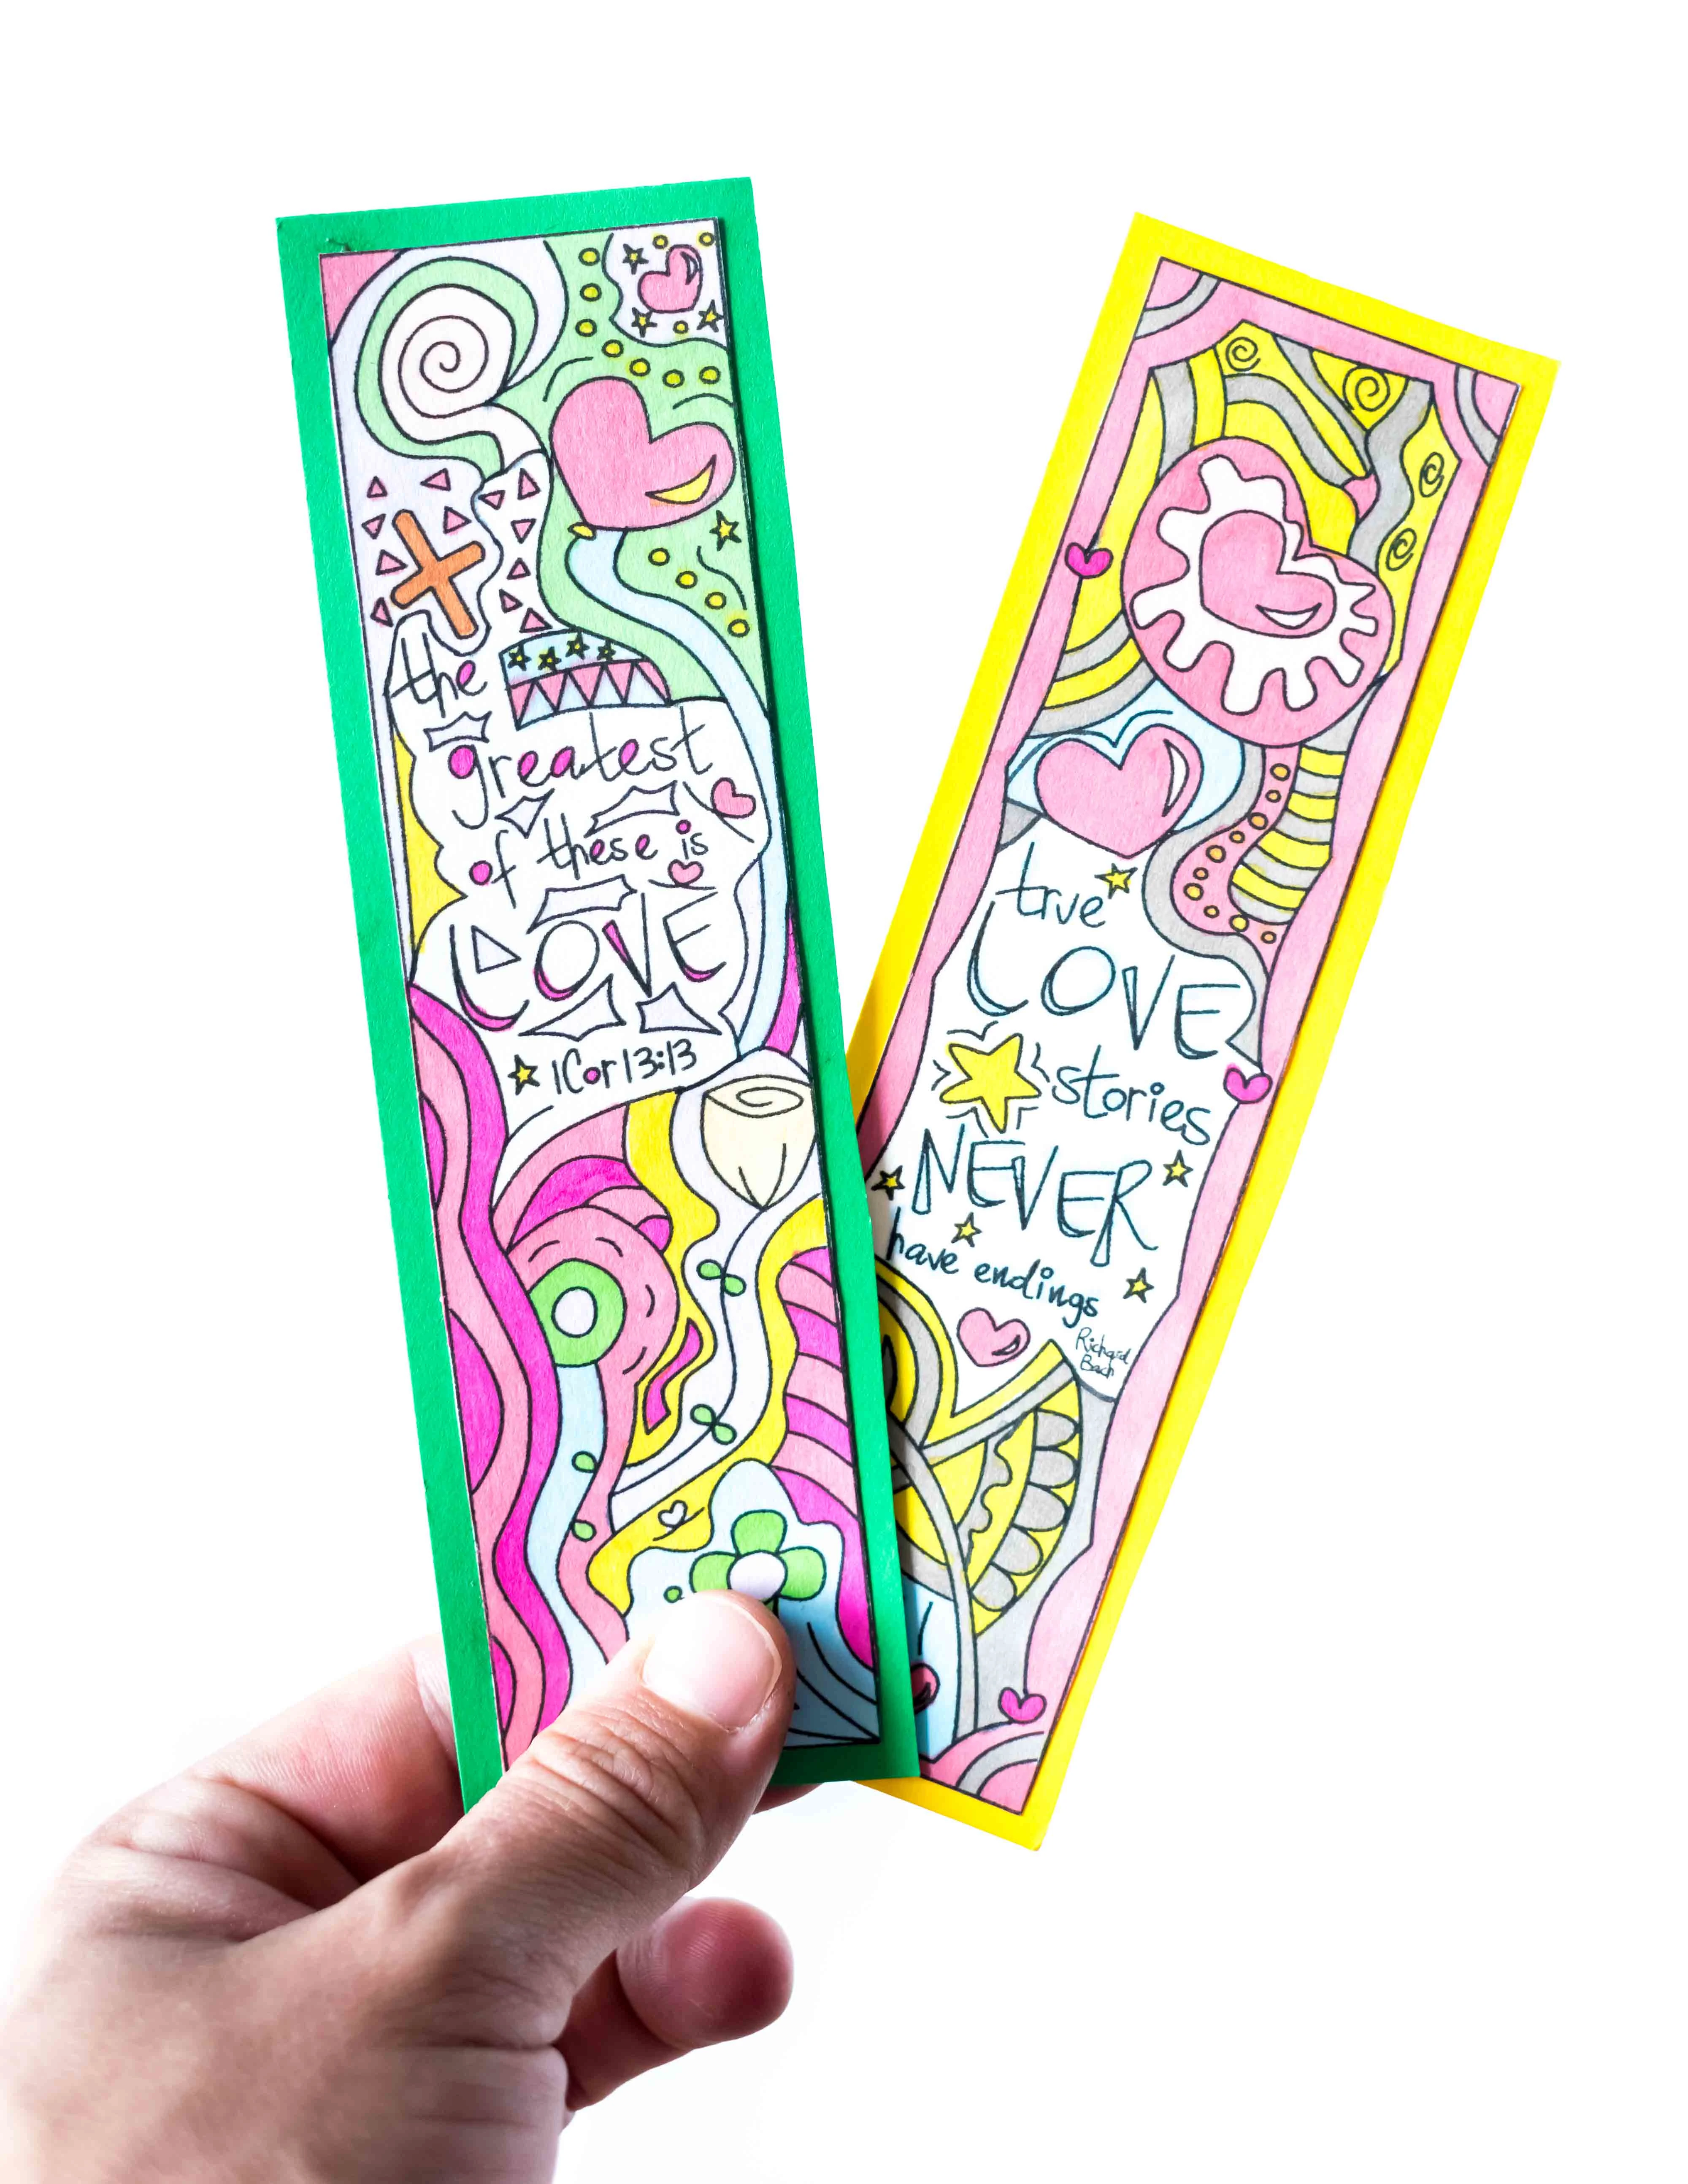 Two Valentine's Day Bookmarks being held in a white background